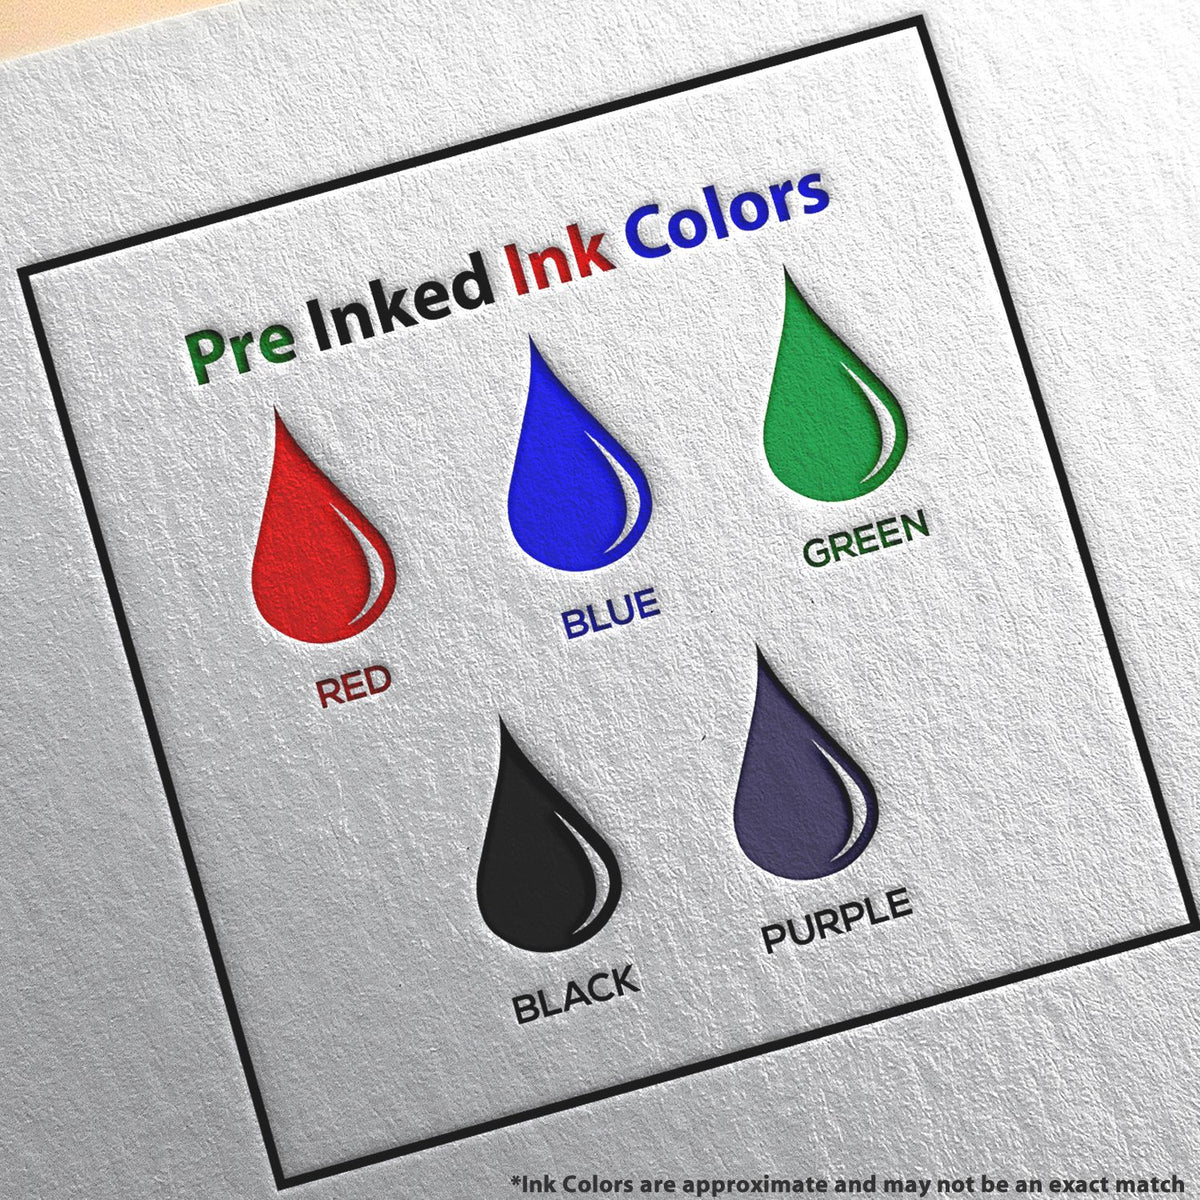 A picture showing the different ink colors or hues available for the Premium MaxLight Pre-Inked Alaska Engineering Stamp product.